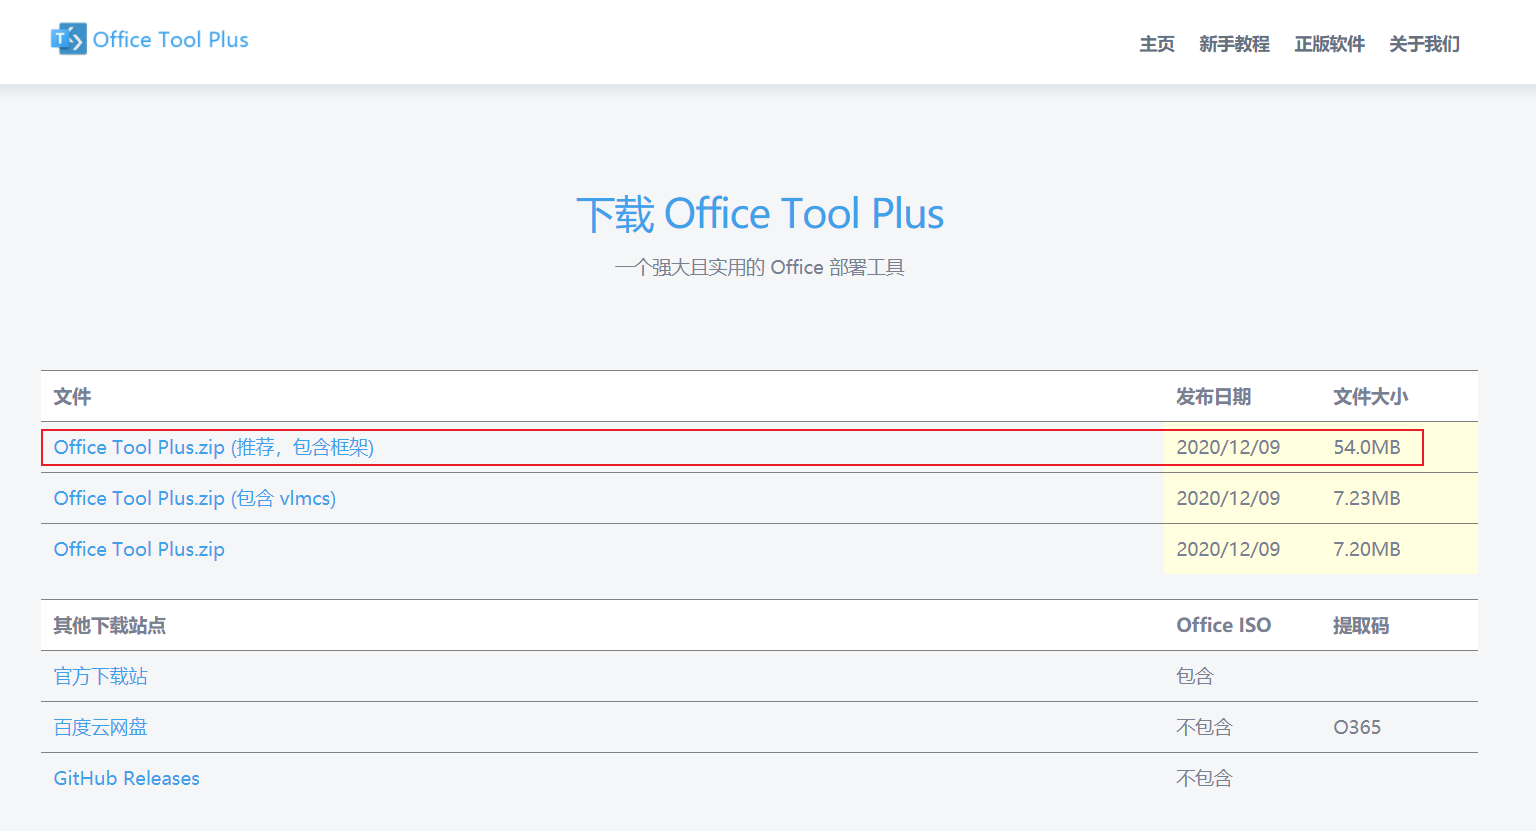 Office Tool Plus 10.4.1.1 download the last version for iphone